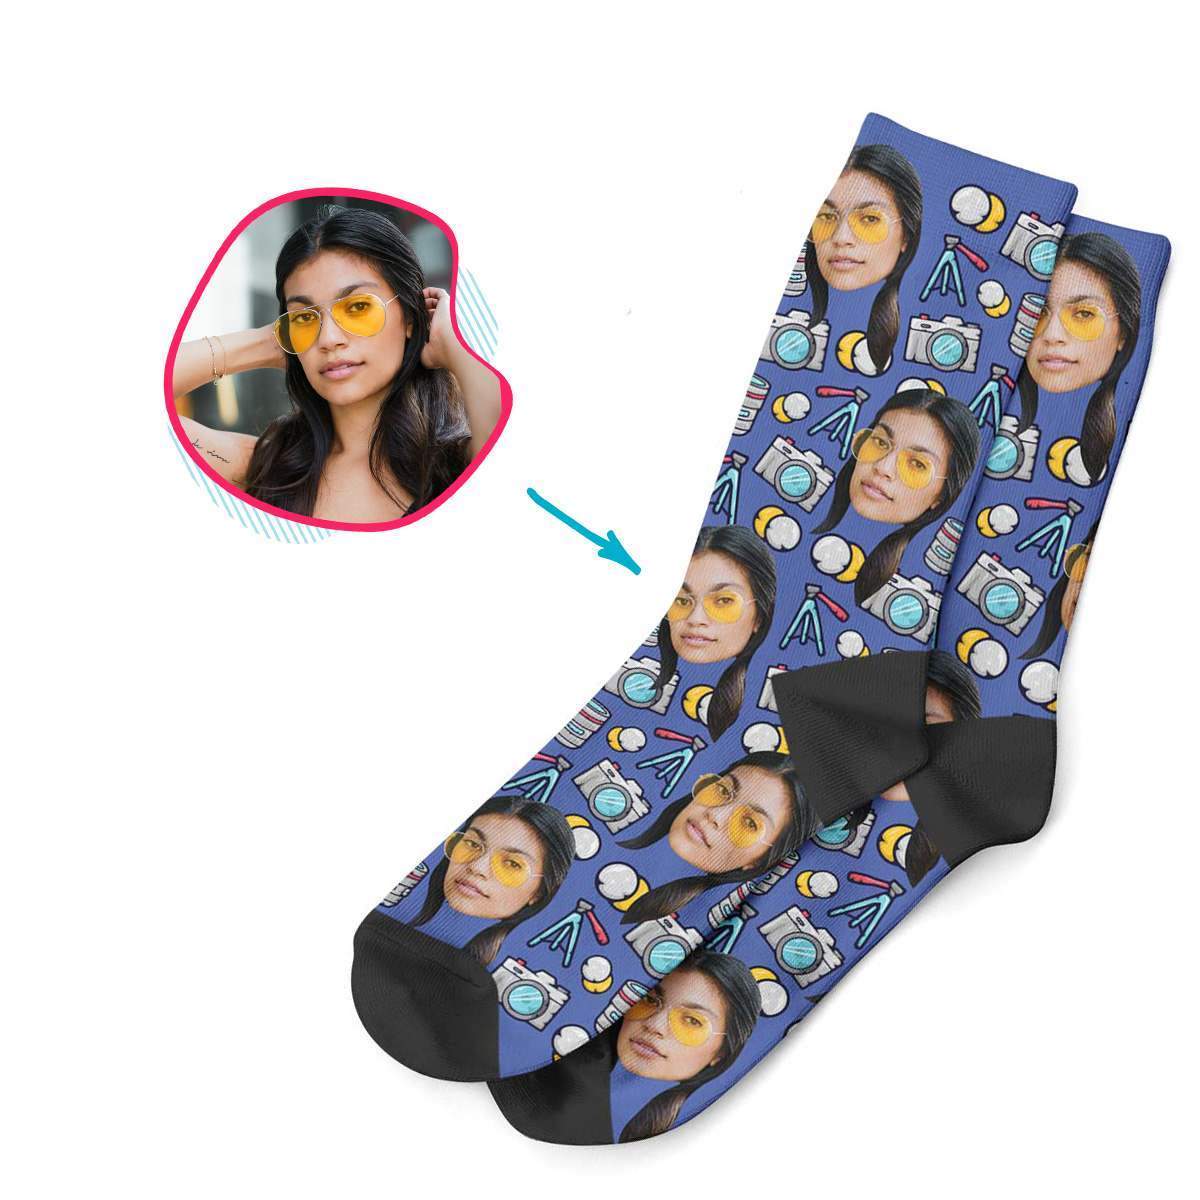 darkblue Photography socks personalized with photo of face printed on them